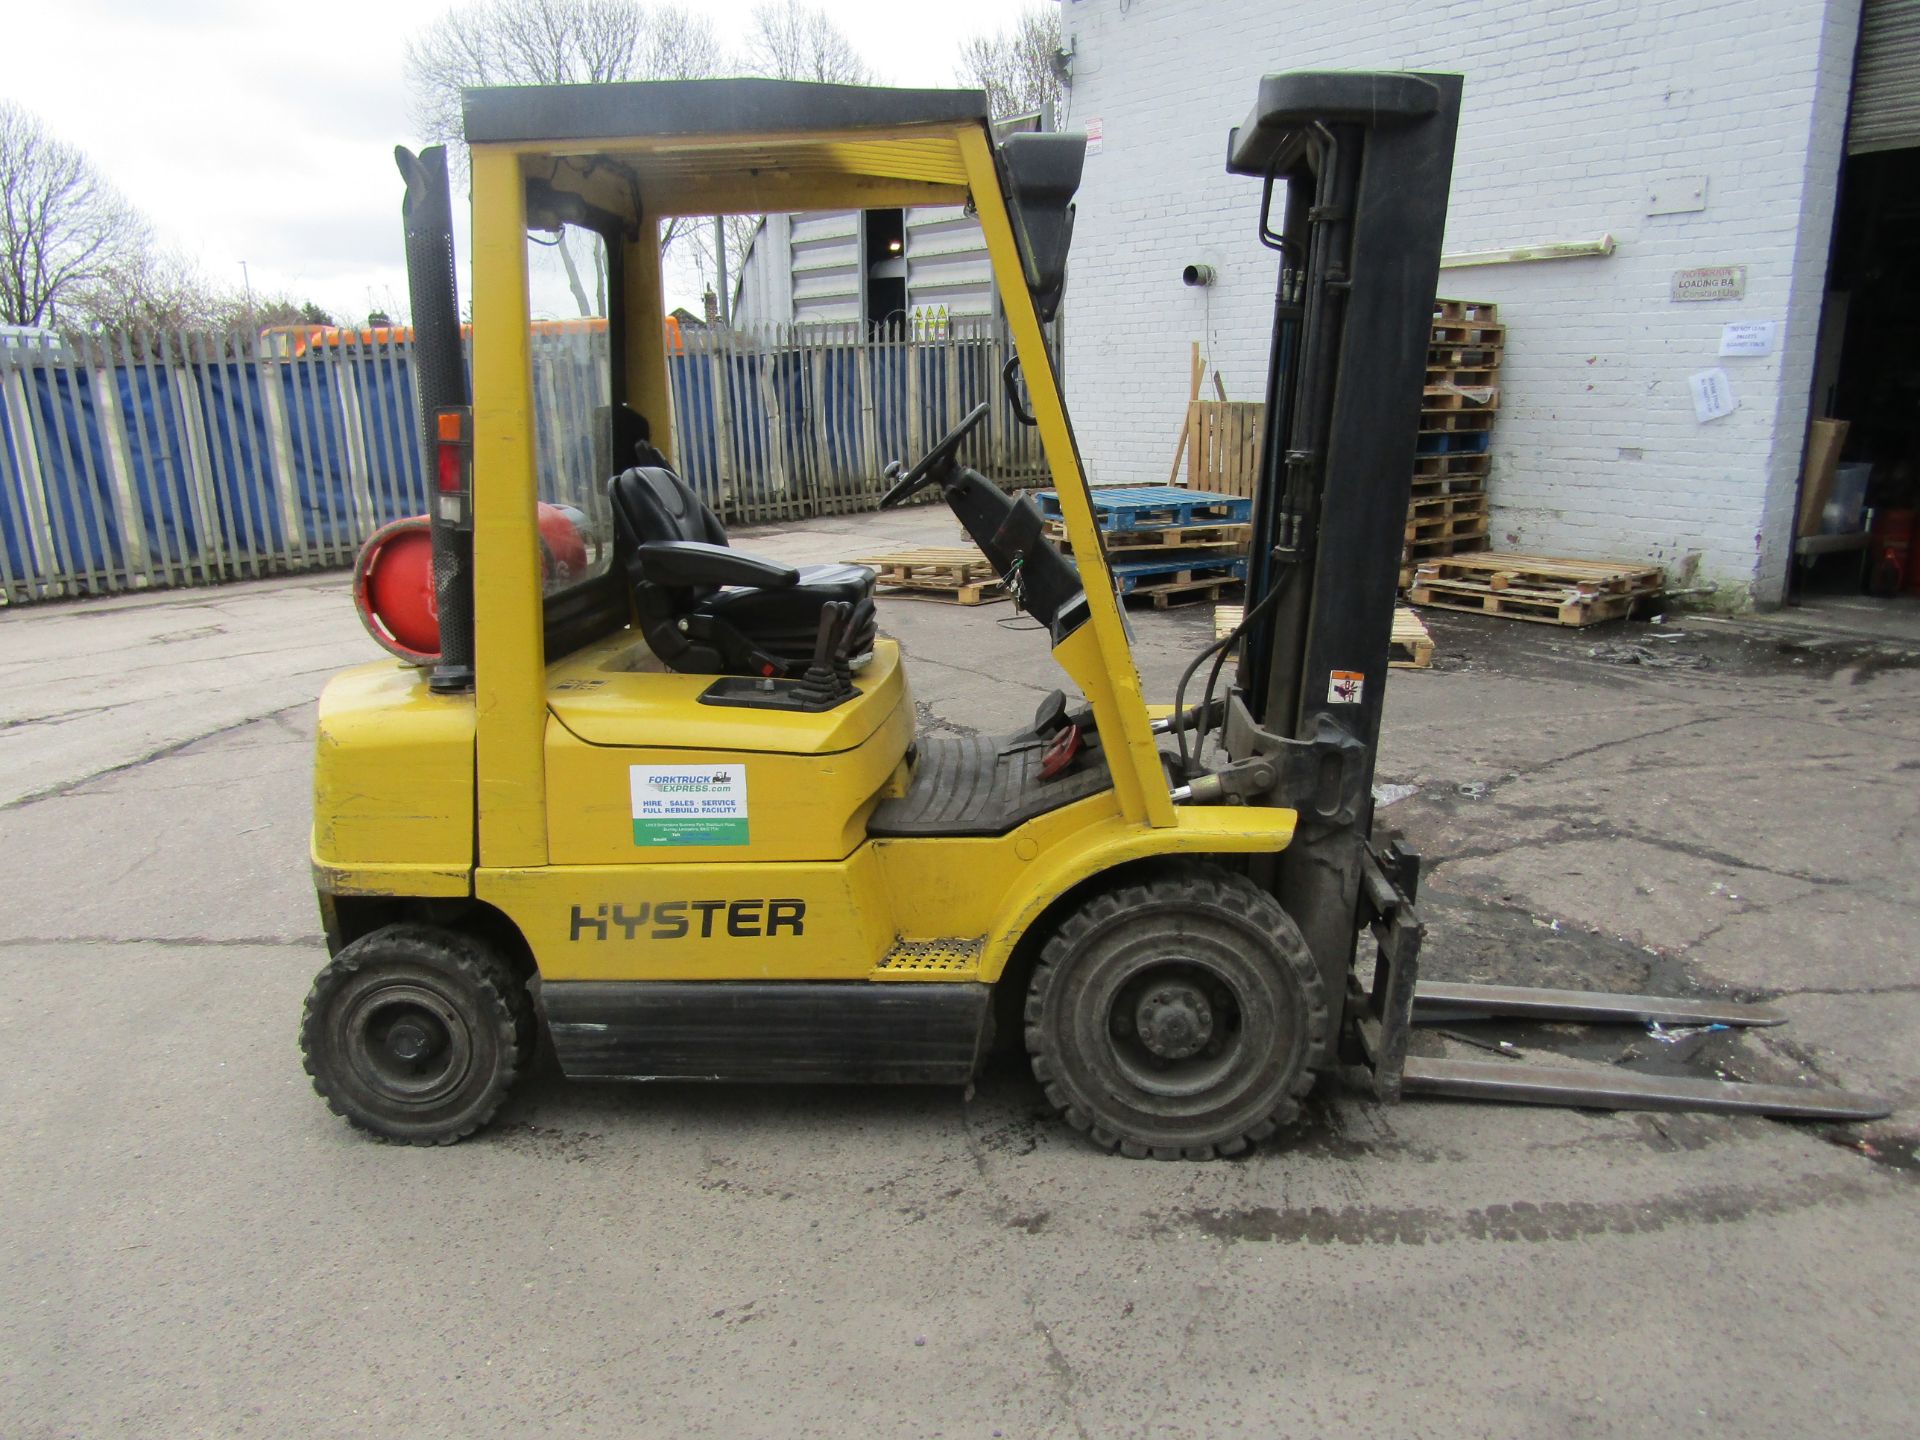 Hyster H2.00Xm Forklift Truck 7235 hours currently manufactured in 2004, has a roof as well as front - Bild 6 aus 12